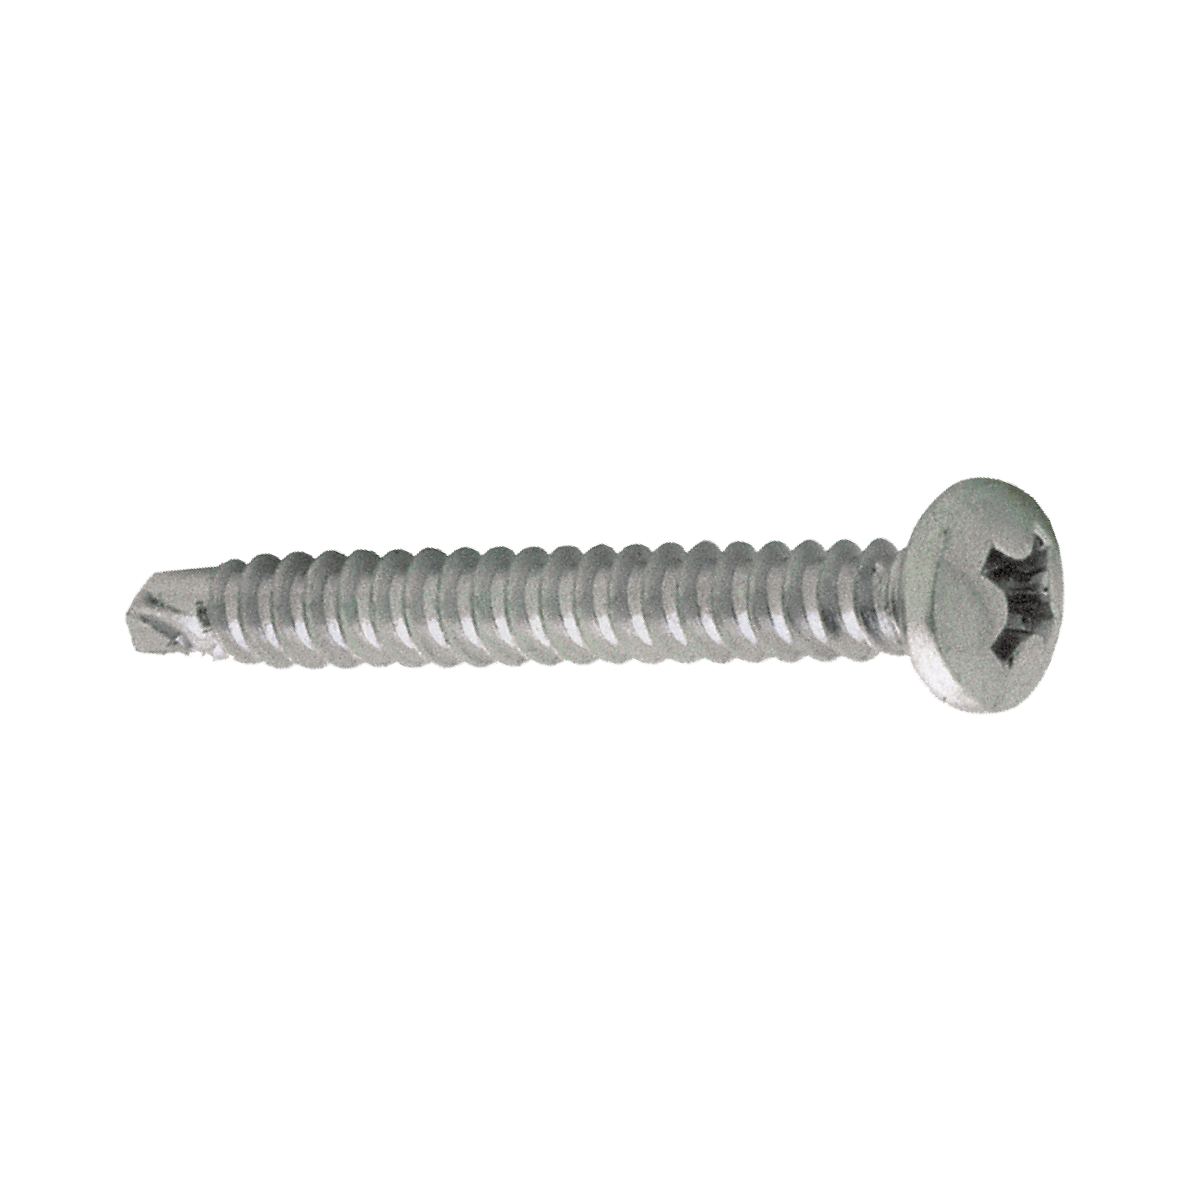 Pan Head 500 Pieces AB137 Phillips Self-Drilling Screws 